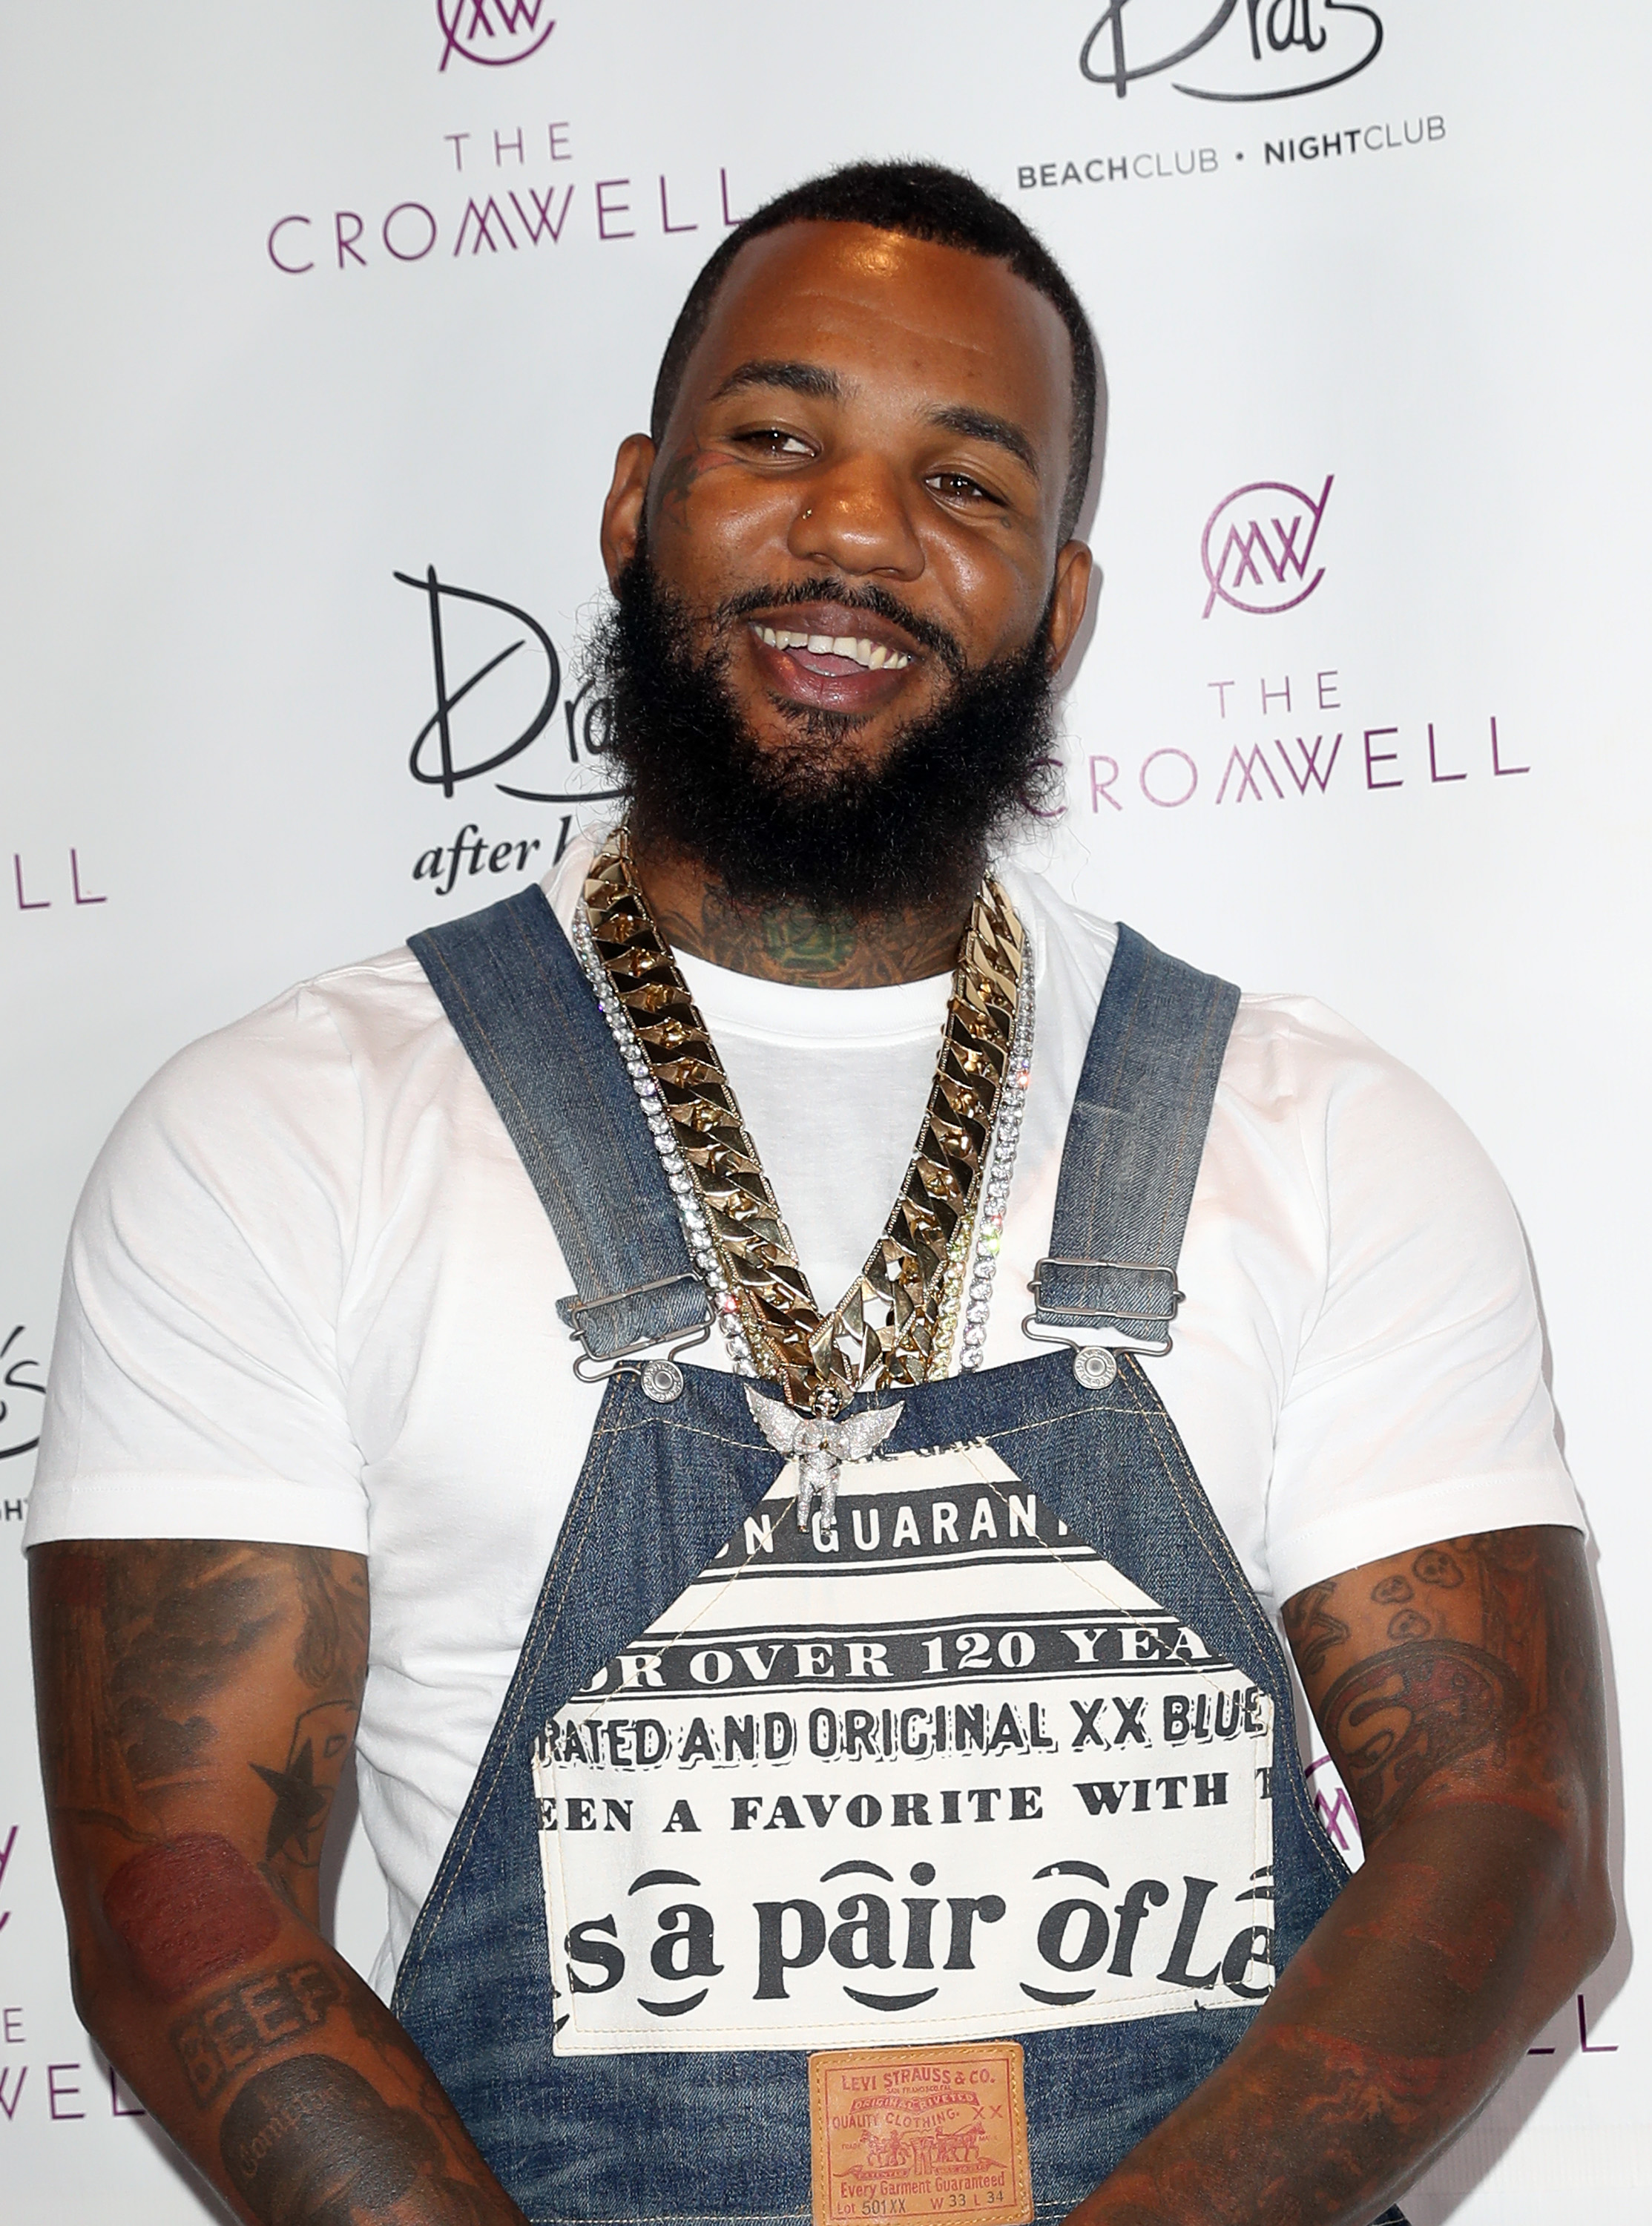 Rapper The Game at Drais